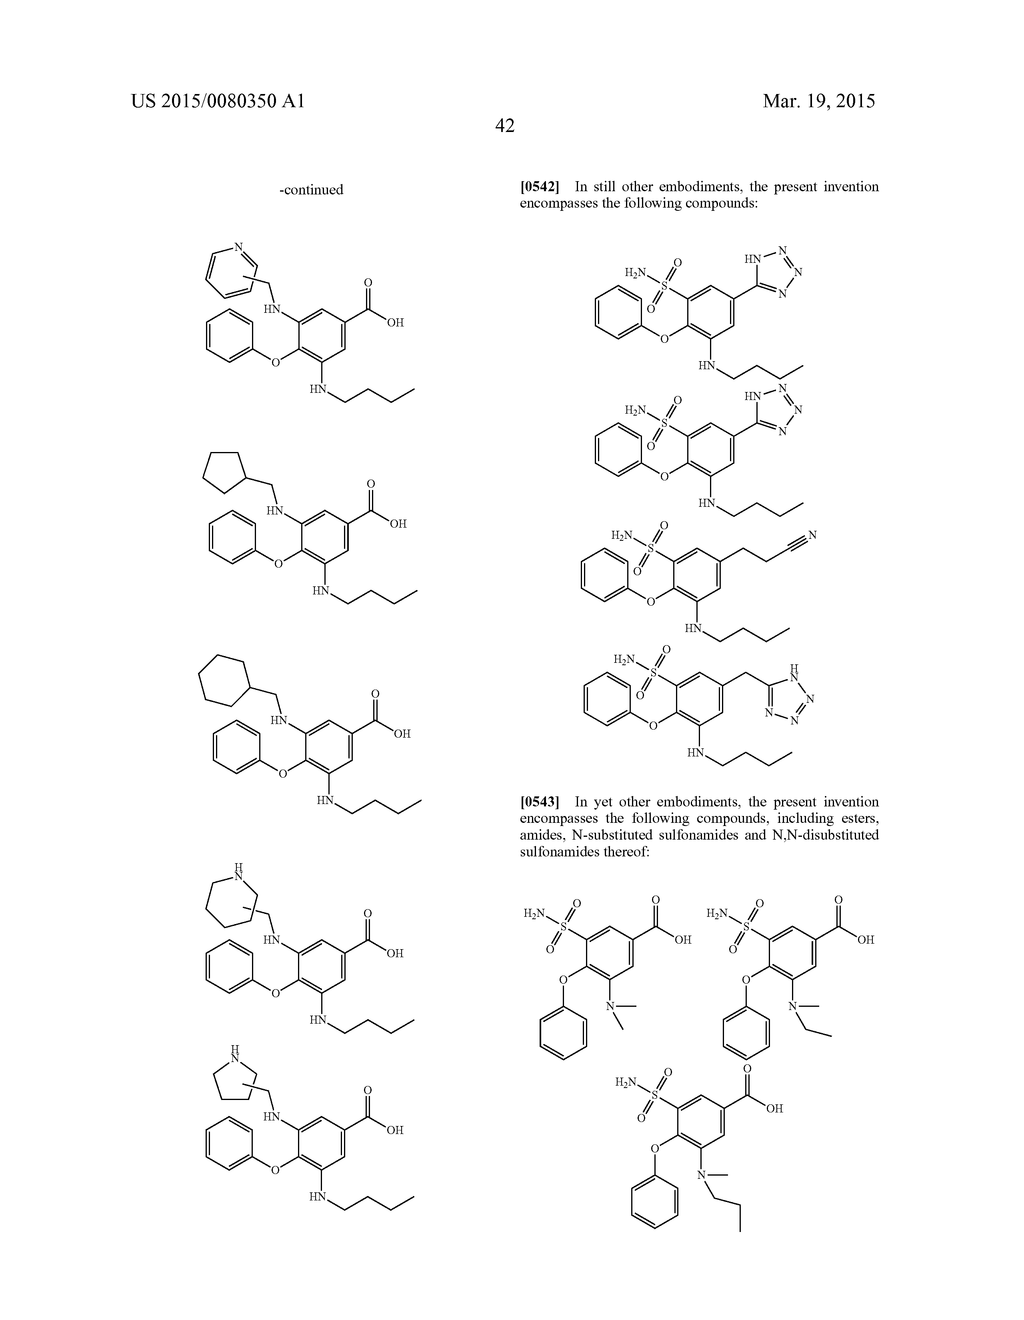 BUMETANIDE ANALOGS, COMPOSITIONS AND METHODS OF USE - diagram, schematic, and image 95